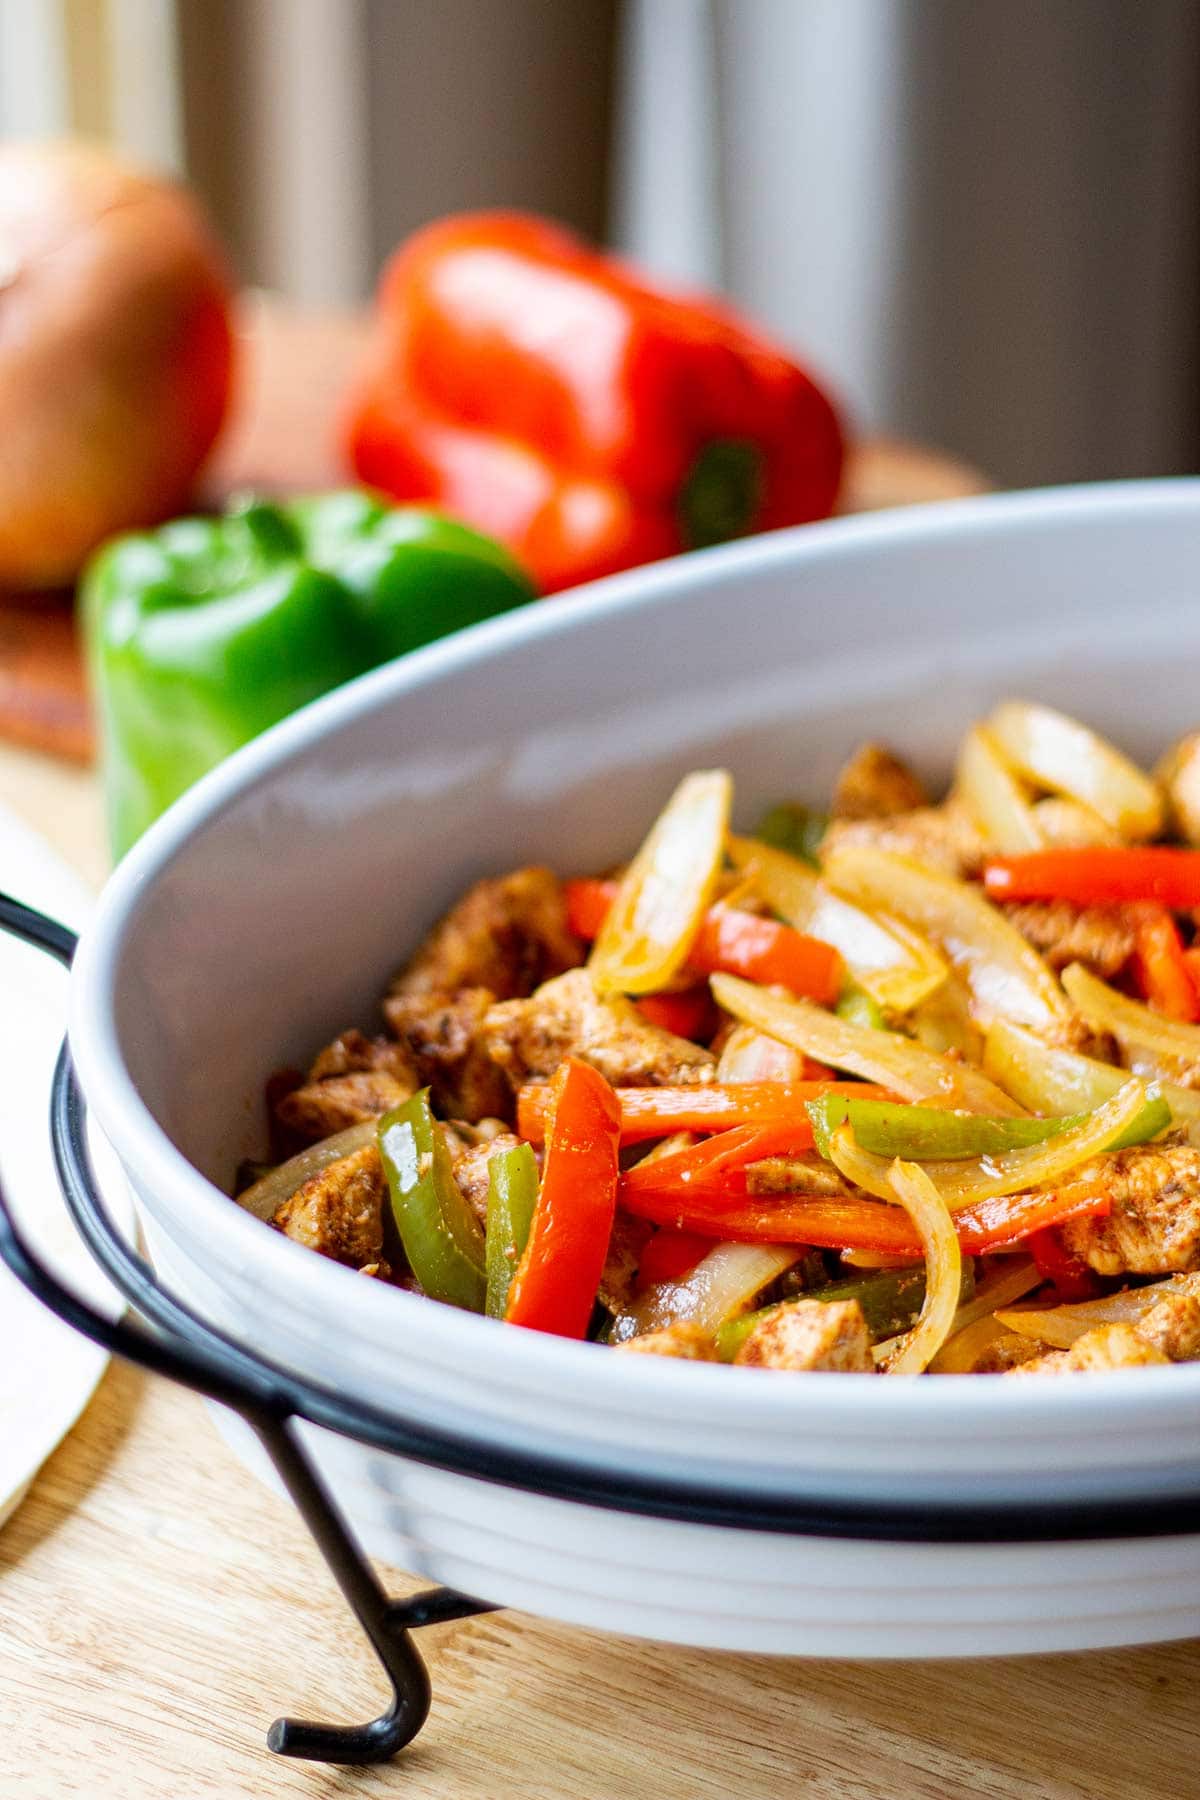 Dish with baked Make-Ahead Chicken Fajitas on a counter.